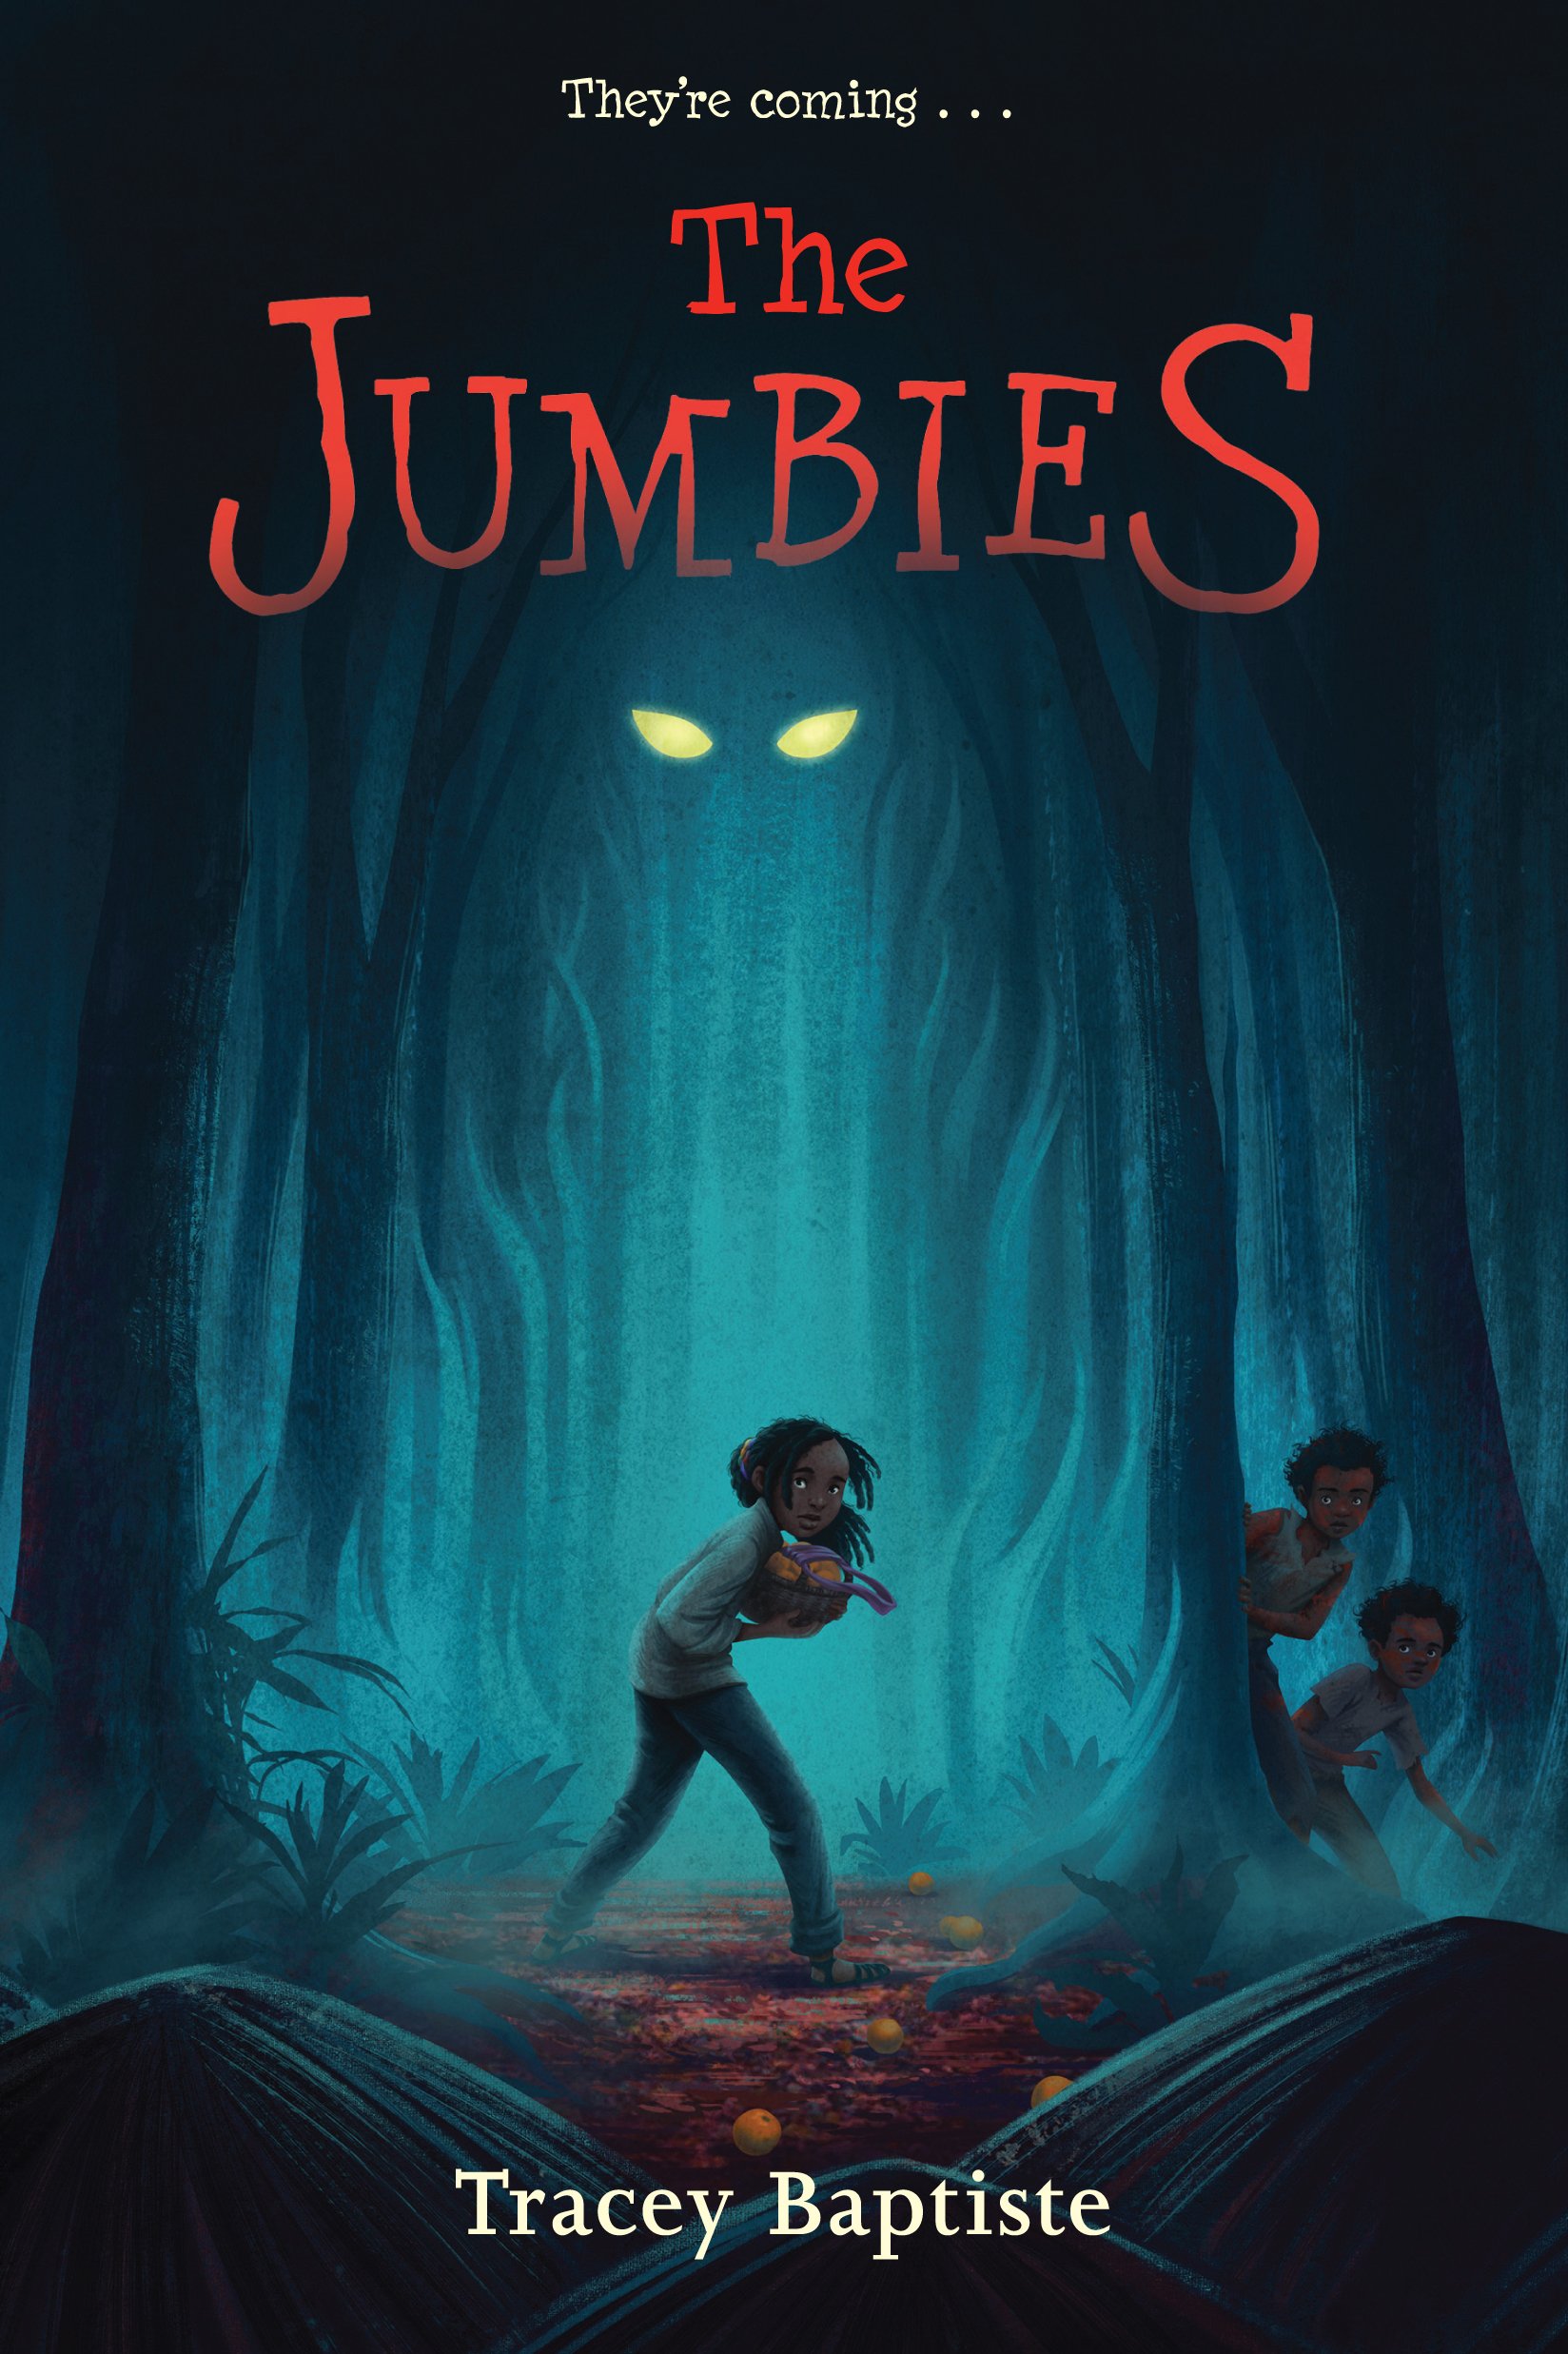 Cover photo for Jumbies by Tracy Baptiste